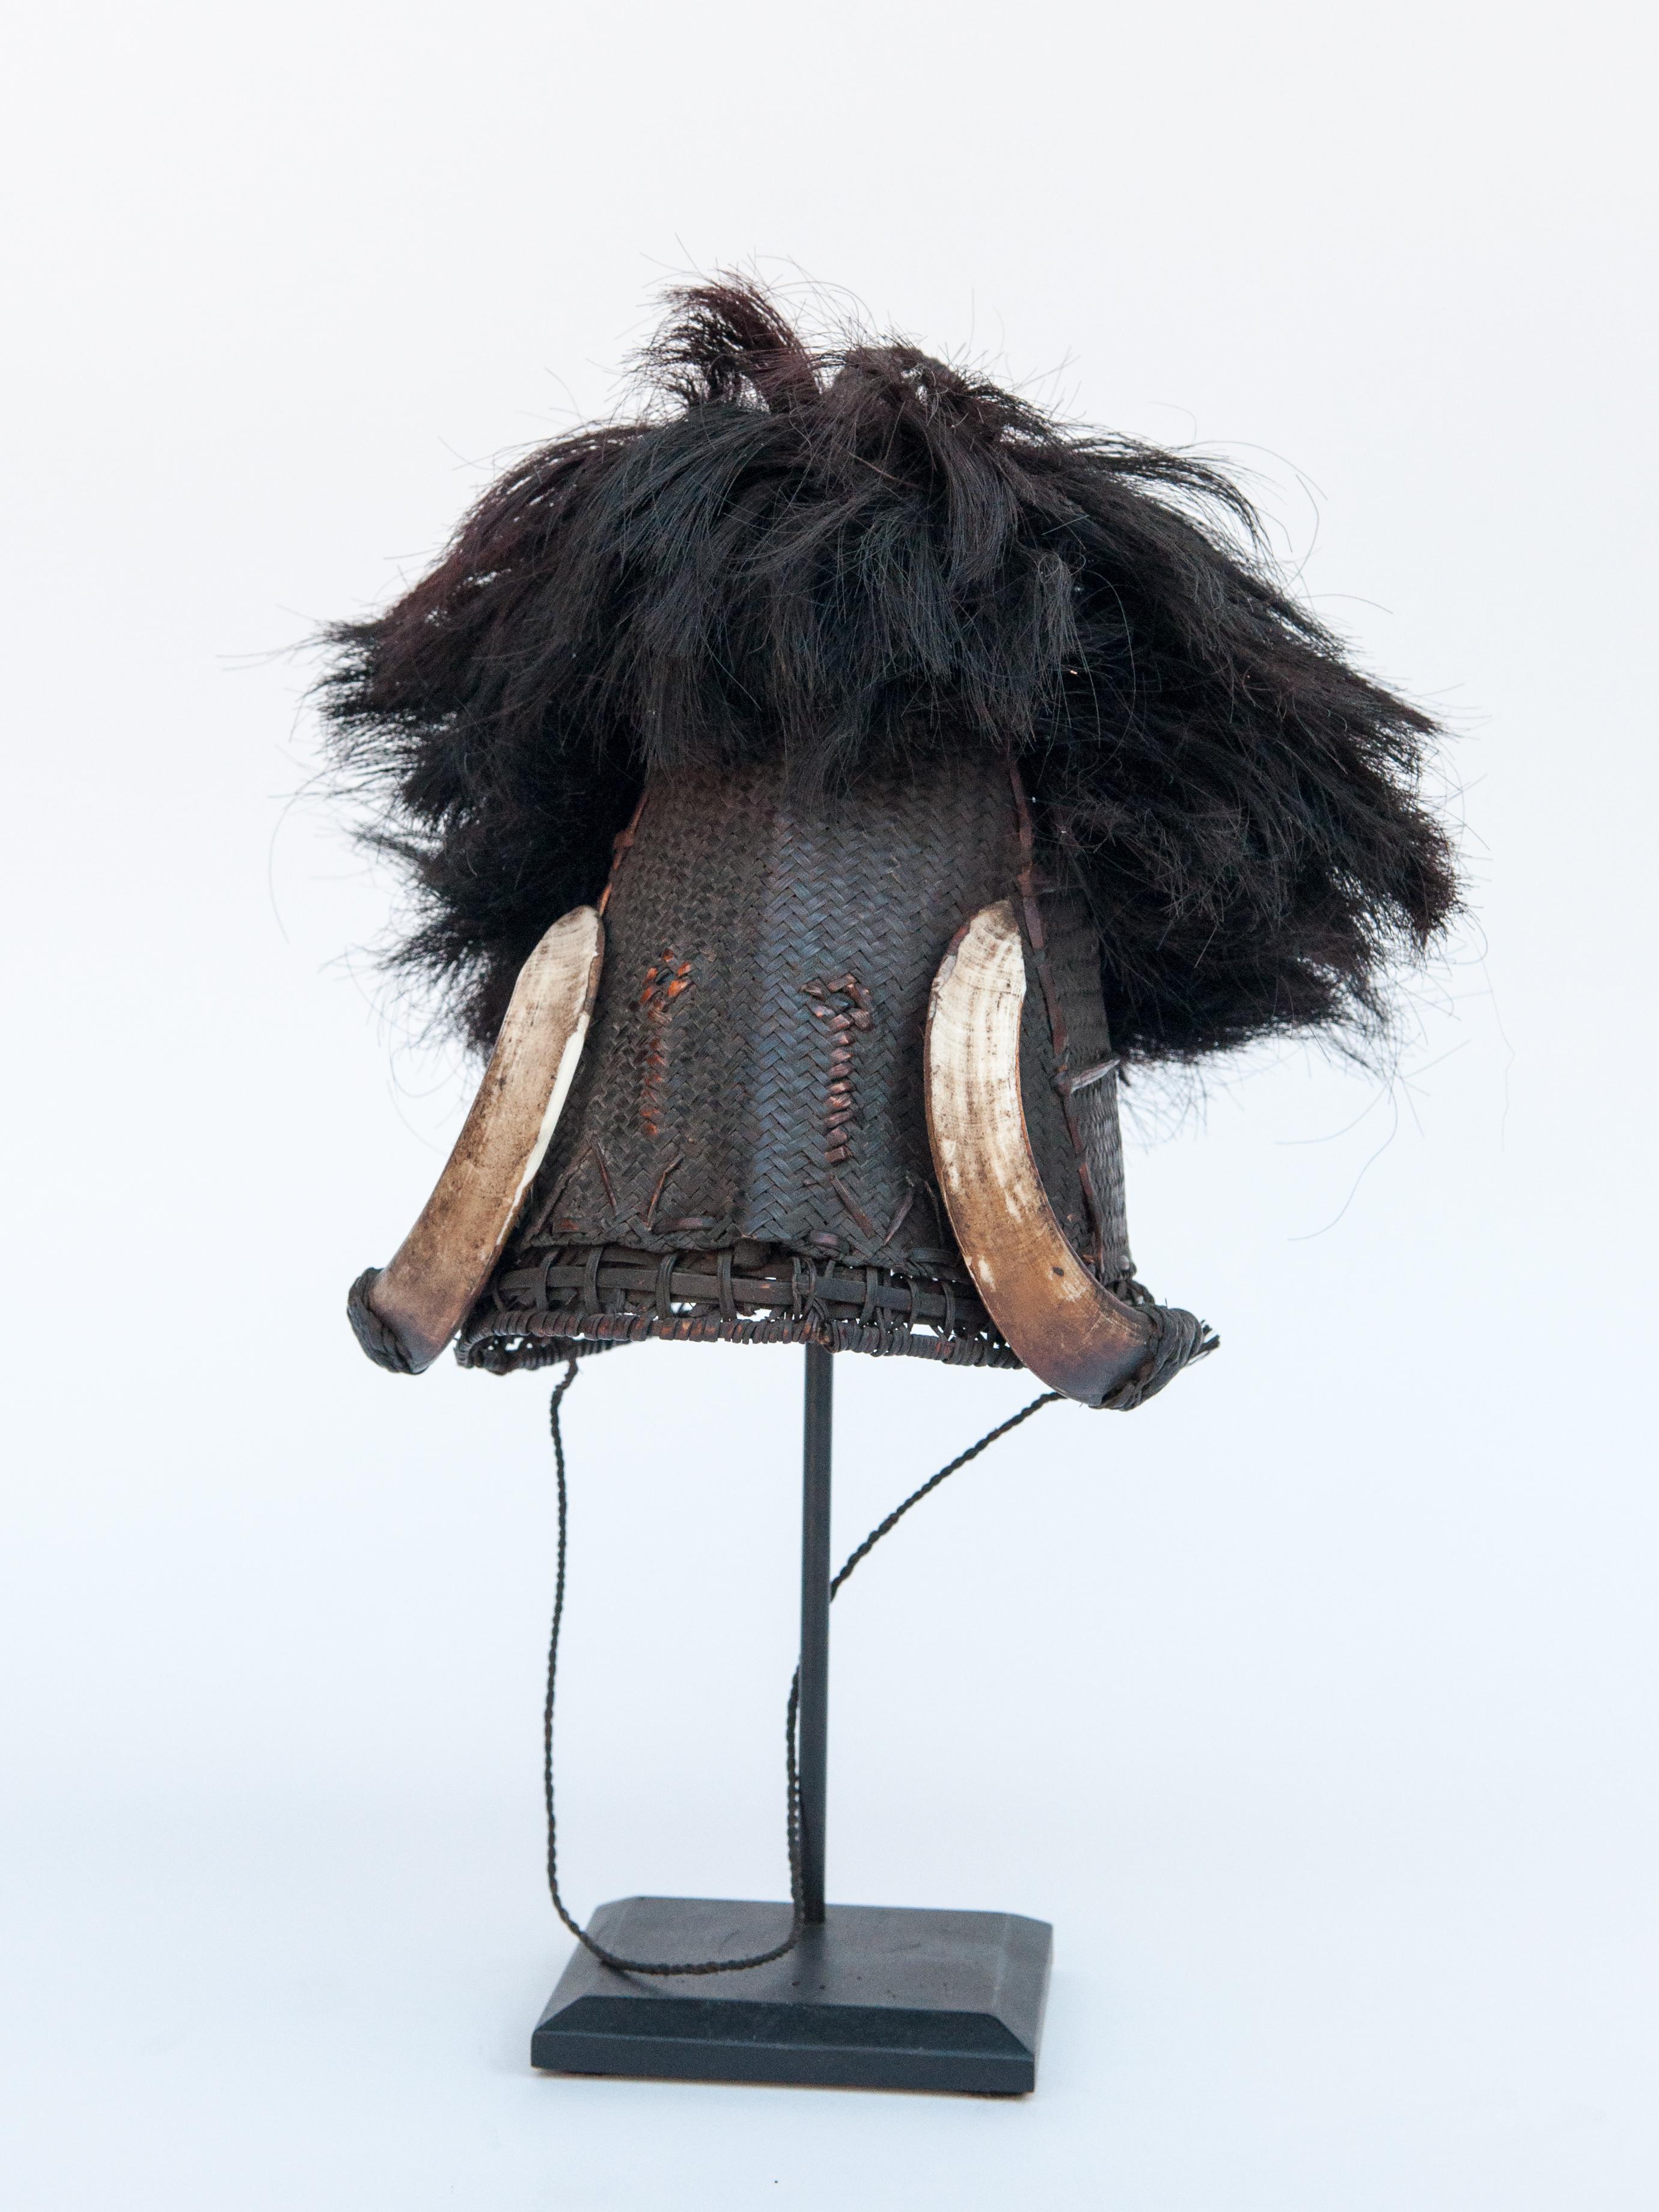 Mid-20th century cane warriors hat boar tusk and goat hair, Konyak, Naga, NE India. Mounted on a metal stand.
This is a ceremonial warriors hat from Nagaland, attributed to the Konyak Naga, but it may have come from any of a diverse collection of